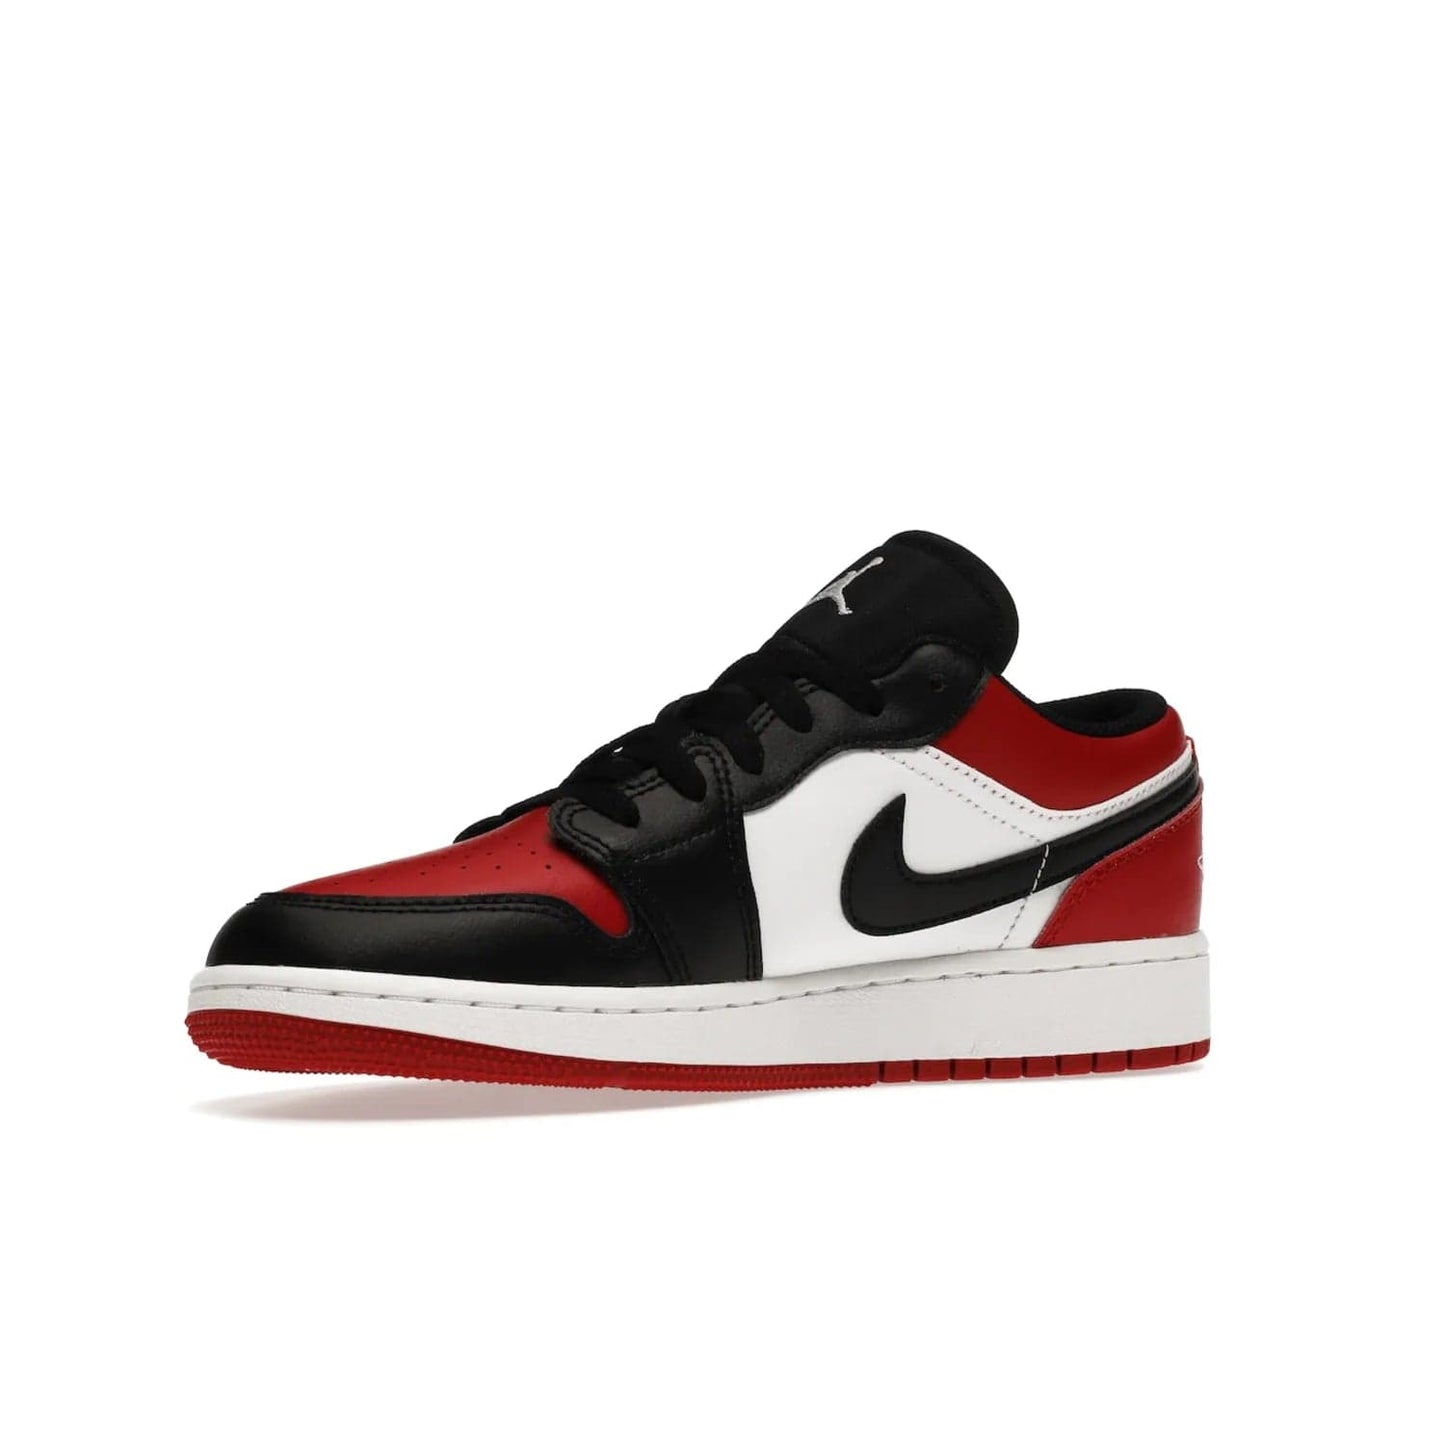 Jordan 1 Low Bred Toe (GS) - Image 16 - Only at www.BallersClubKickz.com - #
Iconic sneaker from Jordan brand with classic colorway, unique detailing & Air Jordan Wings logo. Step into the shoes of the greats with the Jordan 1 Low Bred Toe GS!